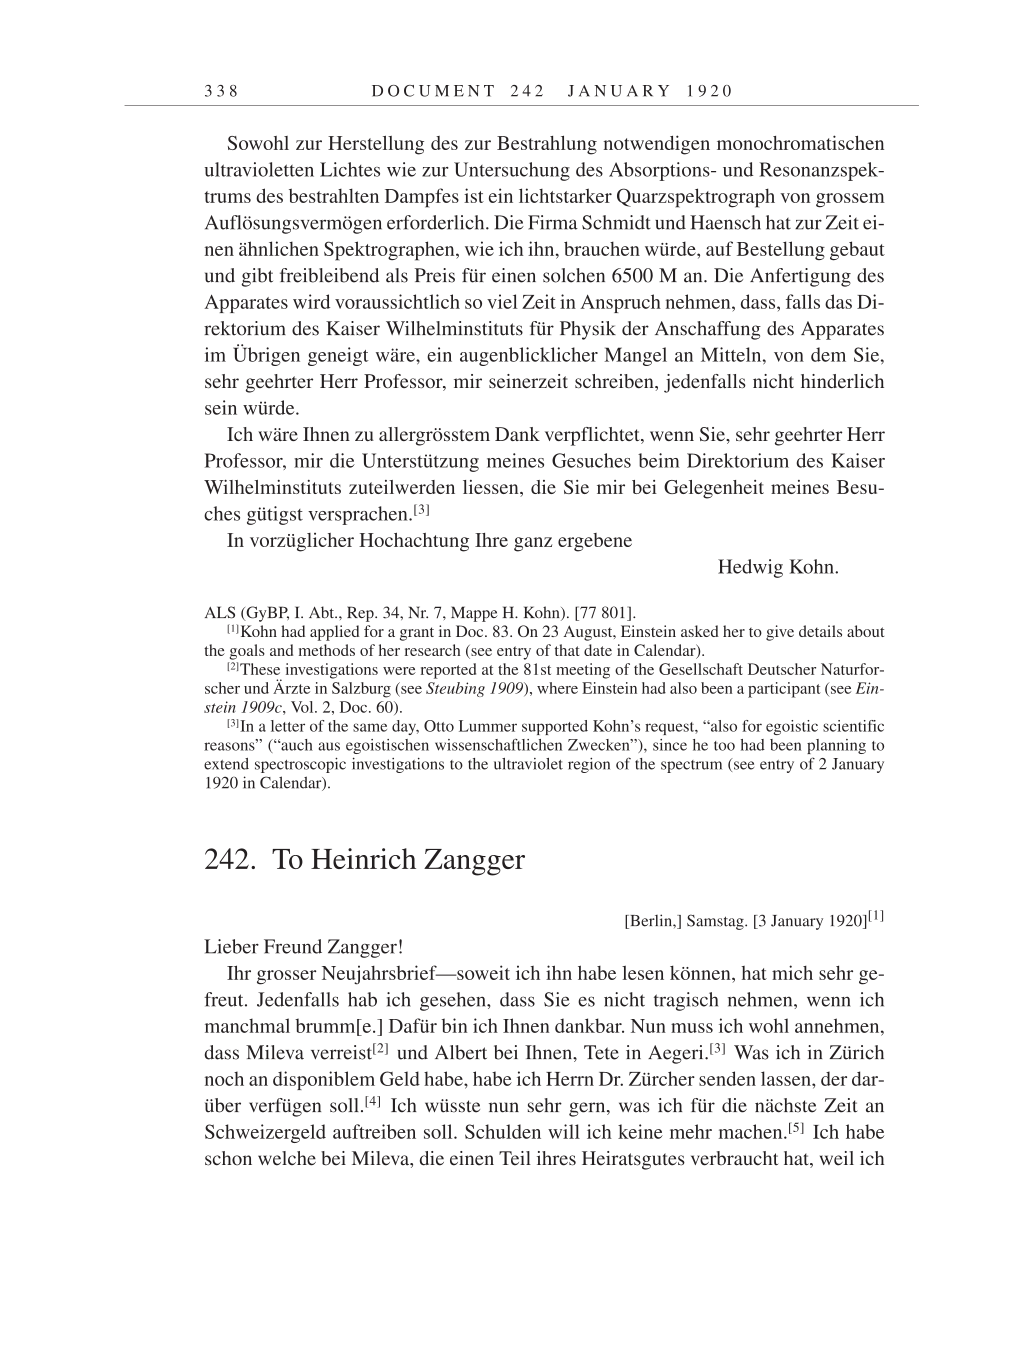 Volume 9: The Berlin Years: Correspondence January 1919-April 1920 page 338